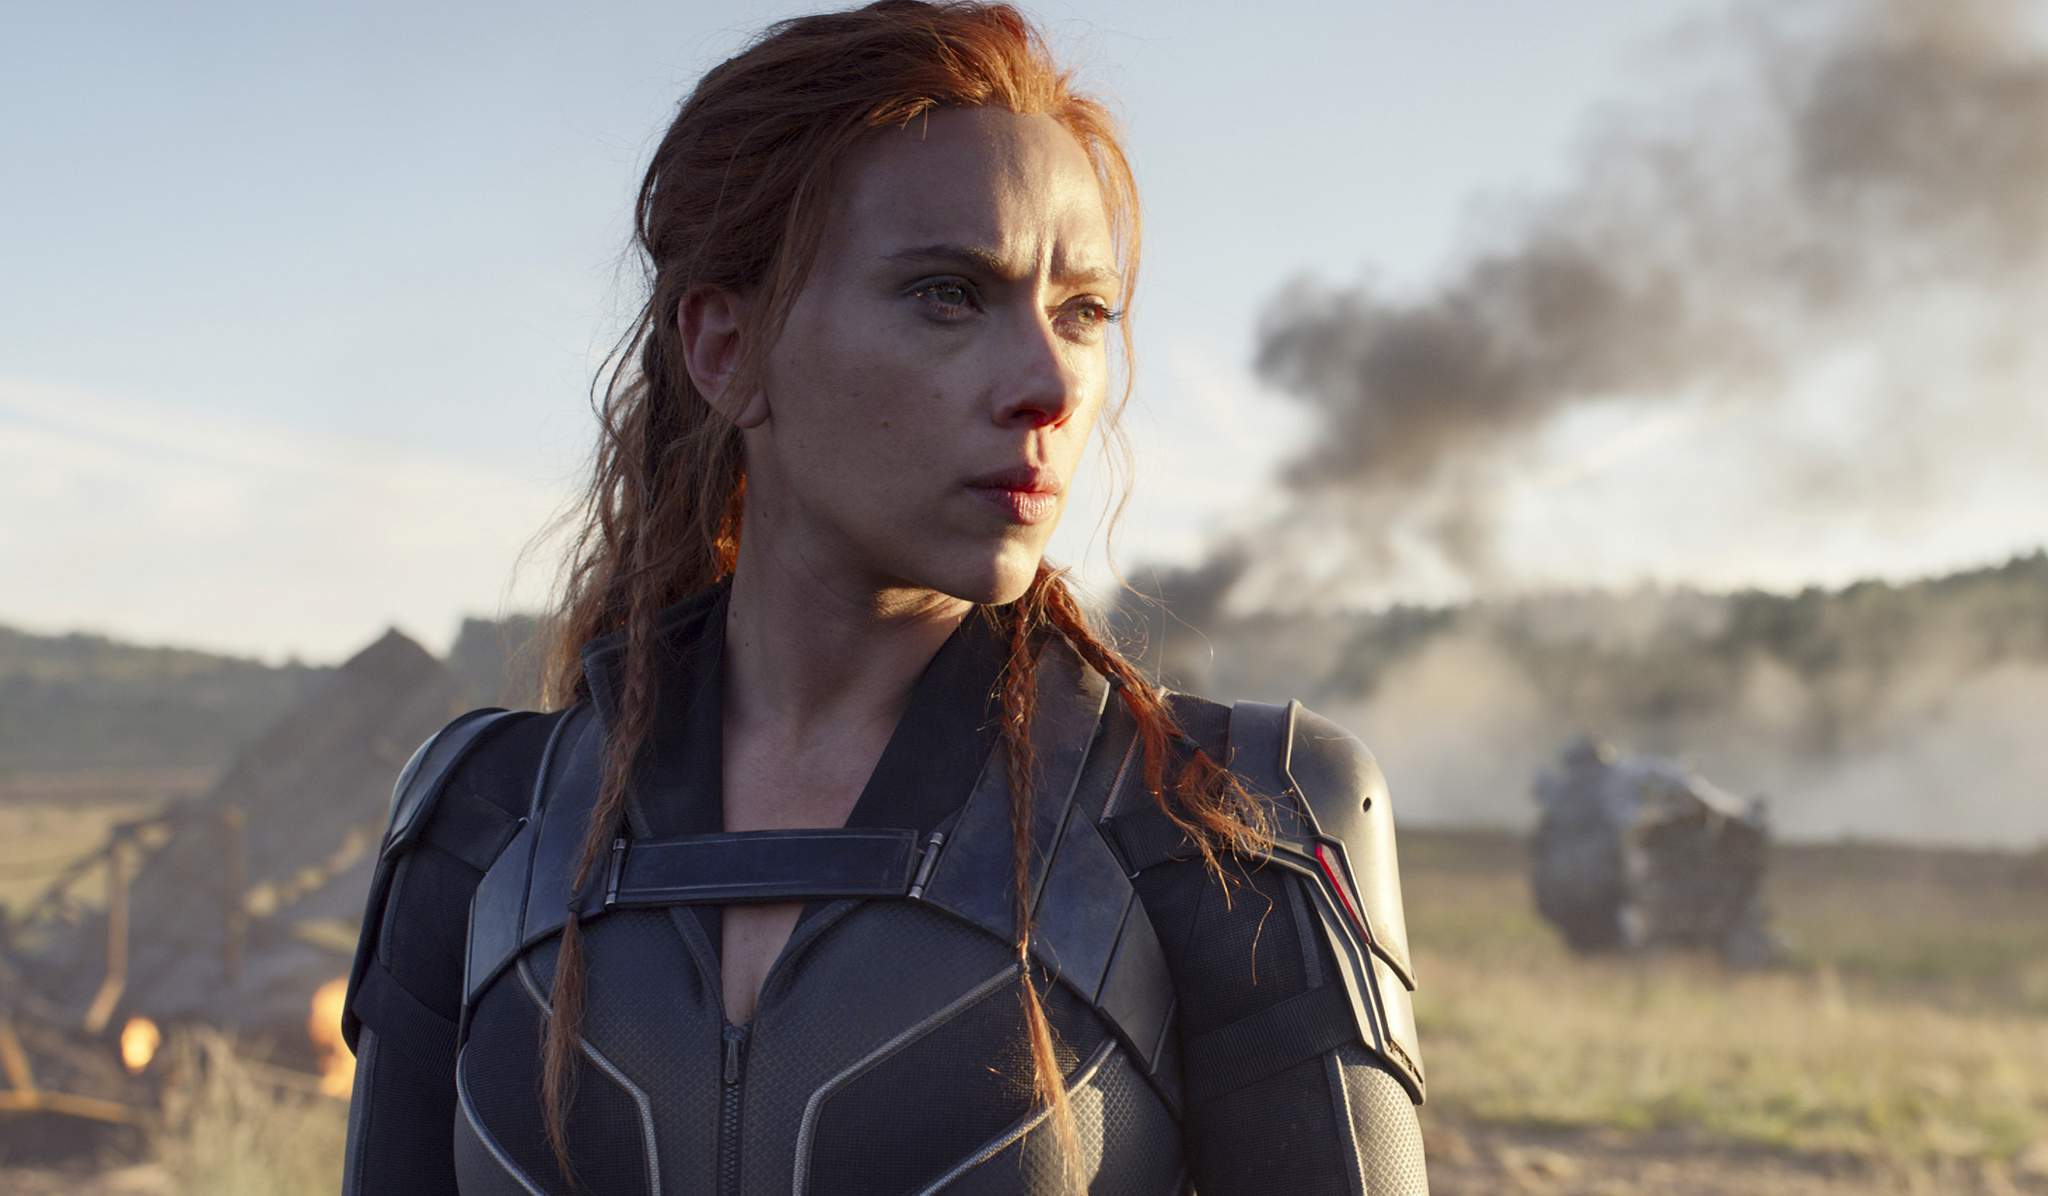 Disney shifts 'Black Widow' and doubles down on streaming